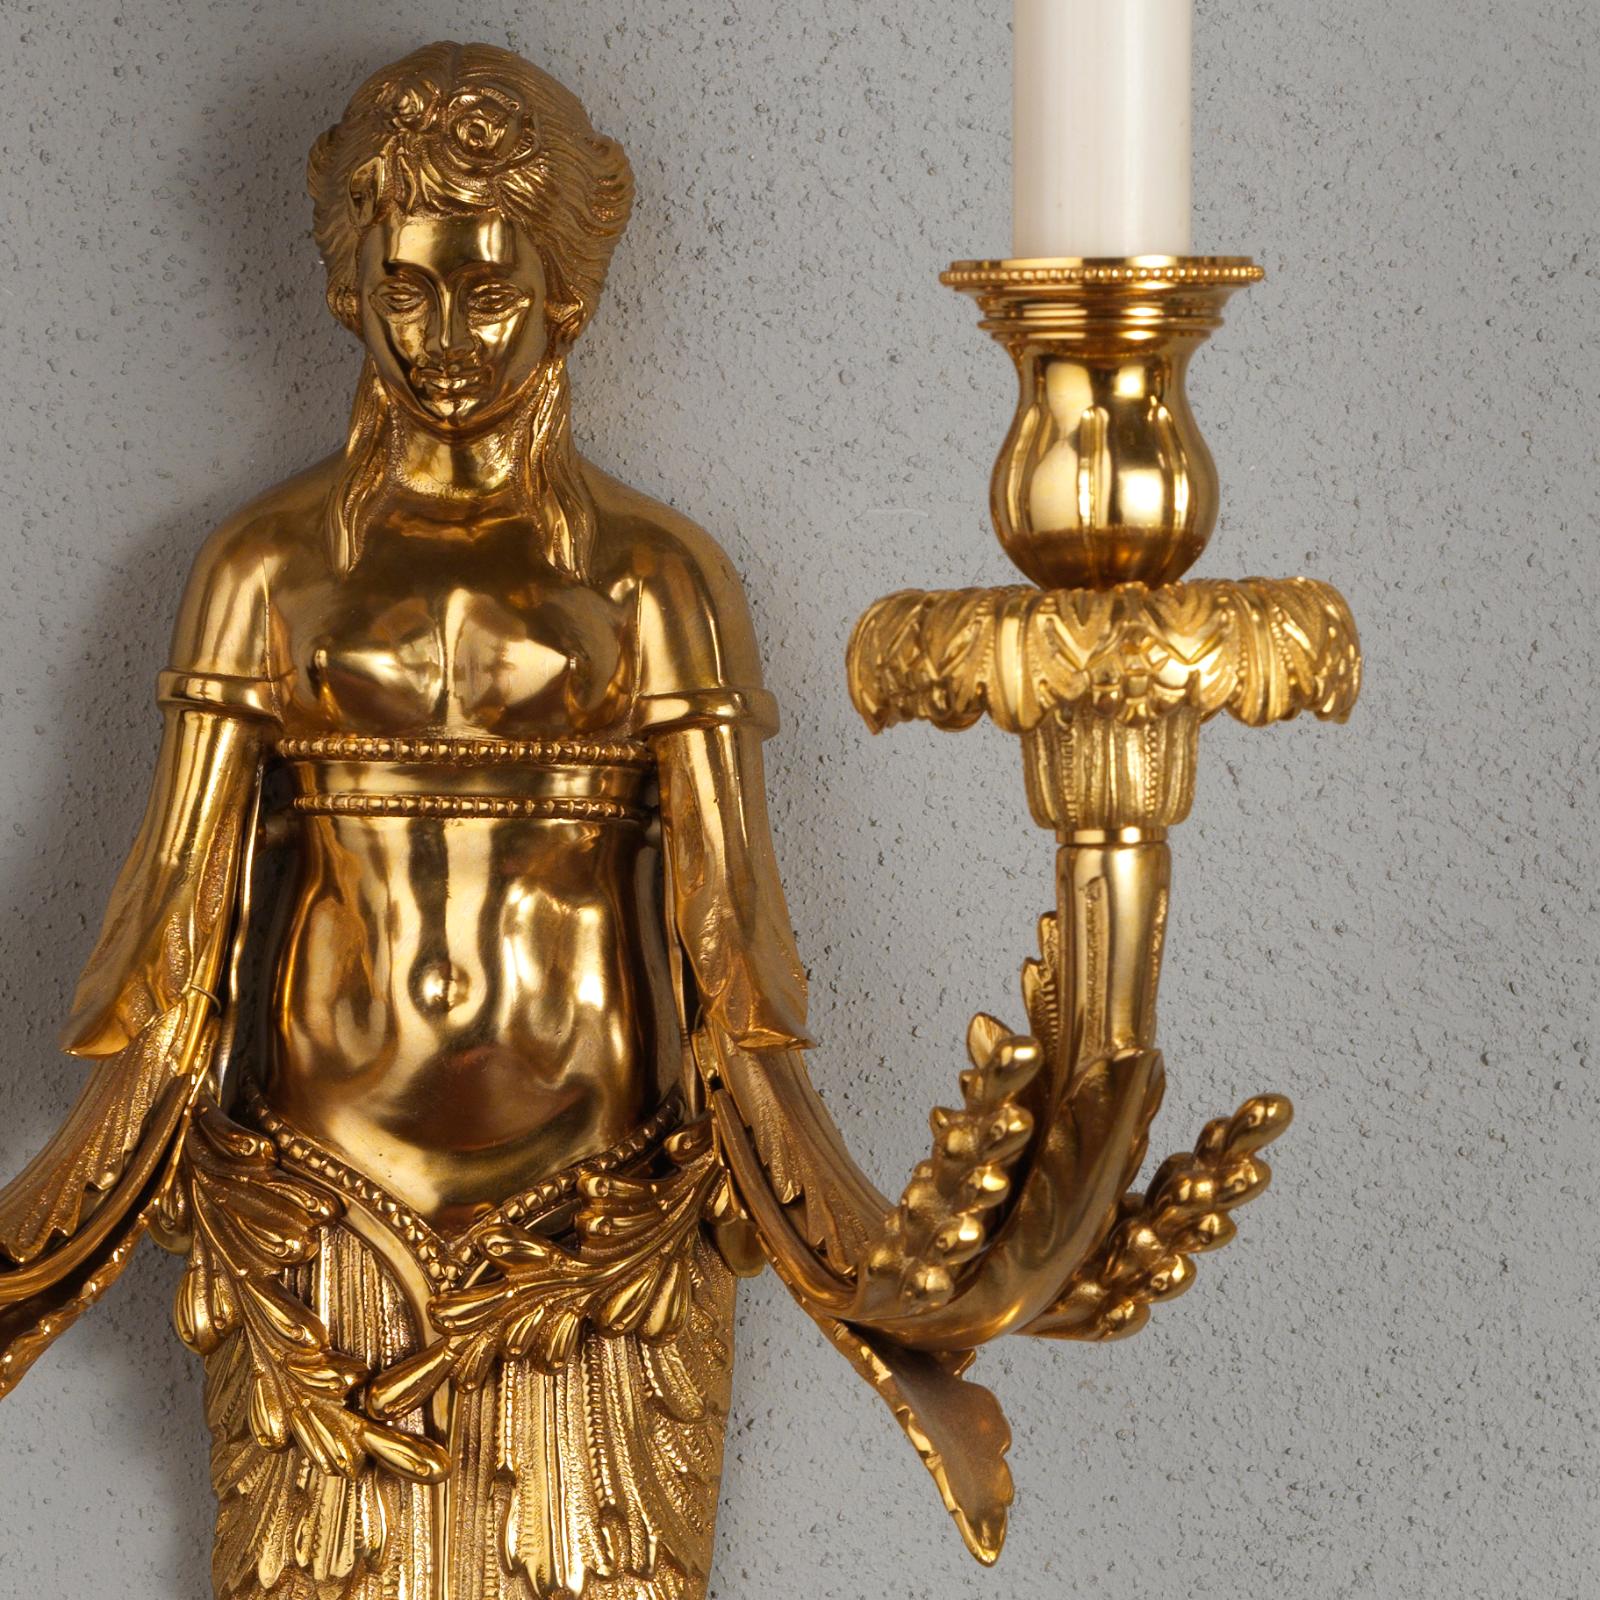 Decorative set of two large gilt bronze figural wall sconces by Gherardo Degli Albizzi. Female figure is characterized by a very rich vegetal decoration with fruit and leaves, both in lower body part and in candelabra arms. Even candleholders